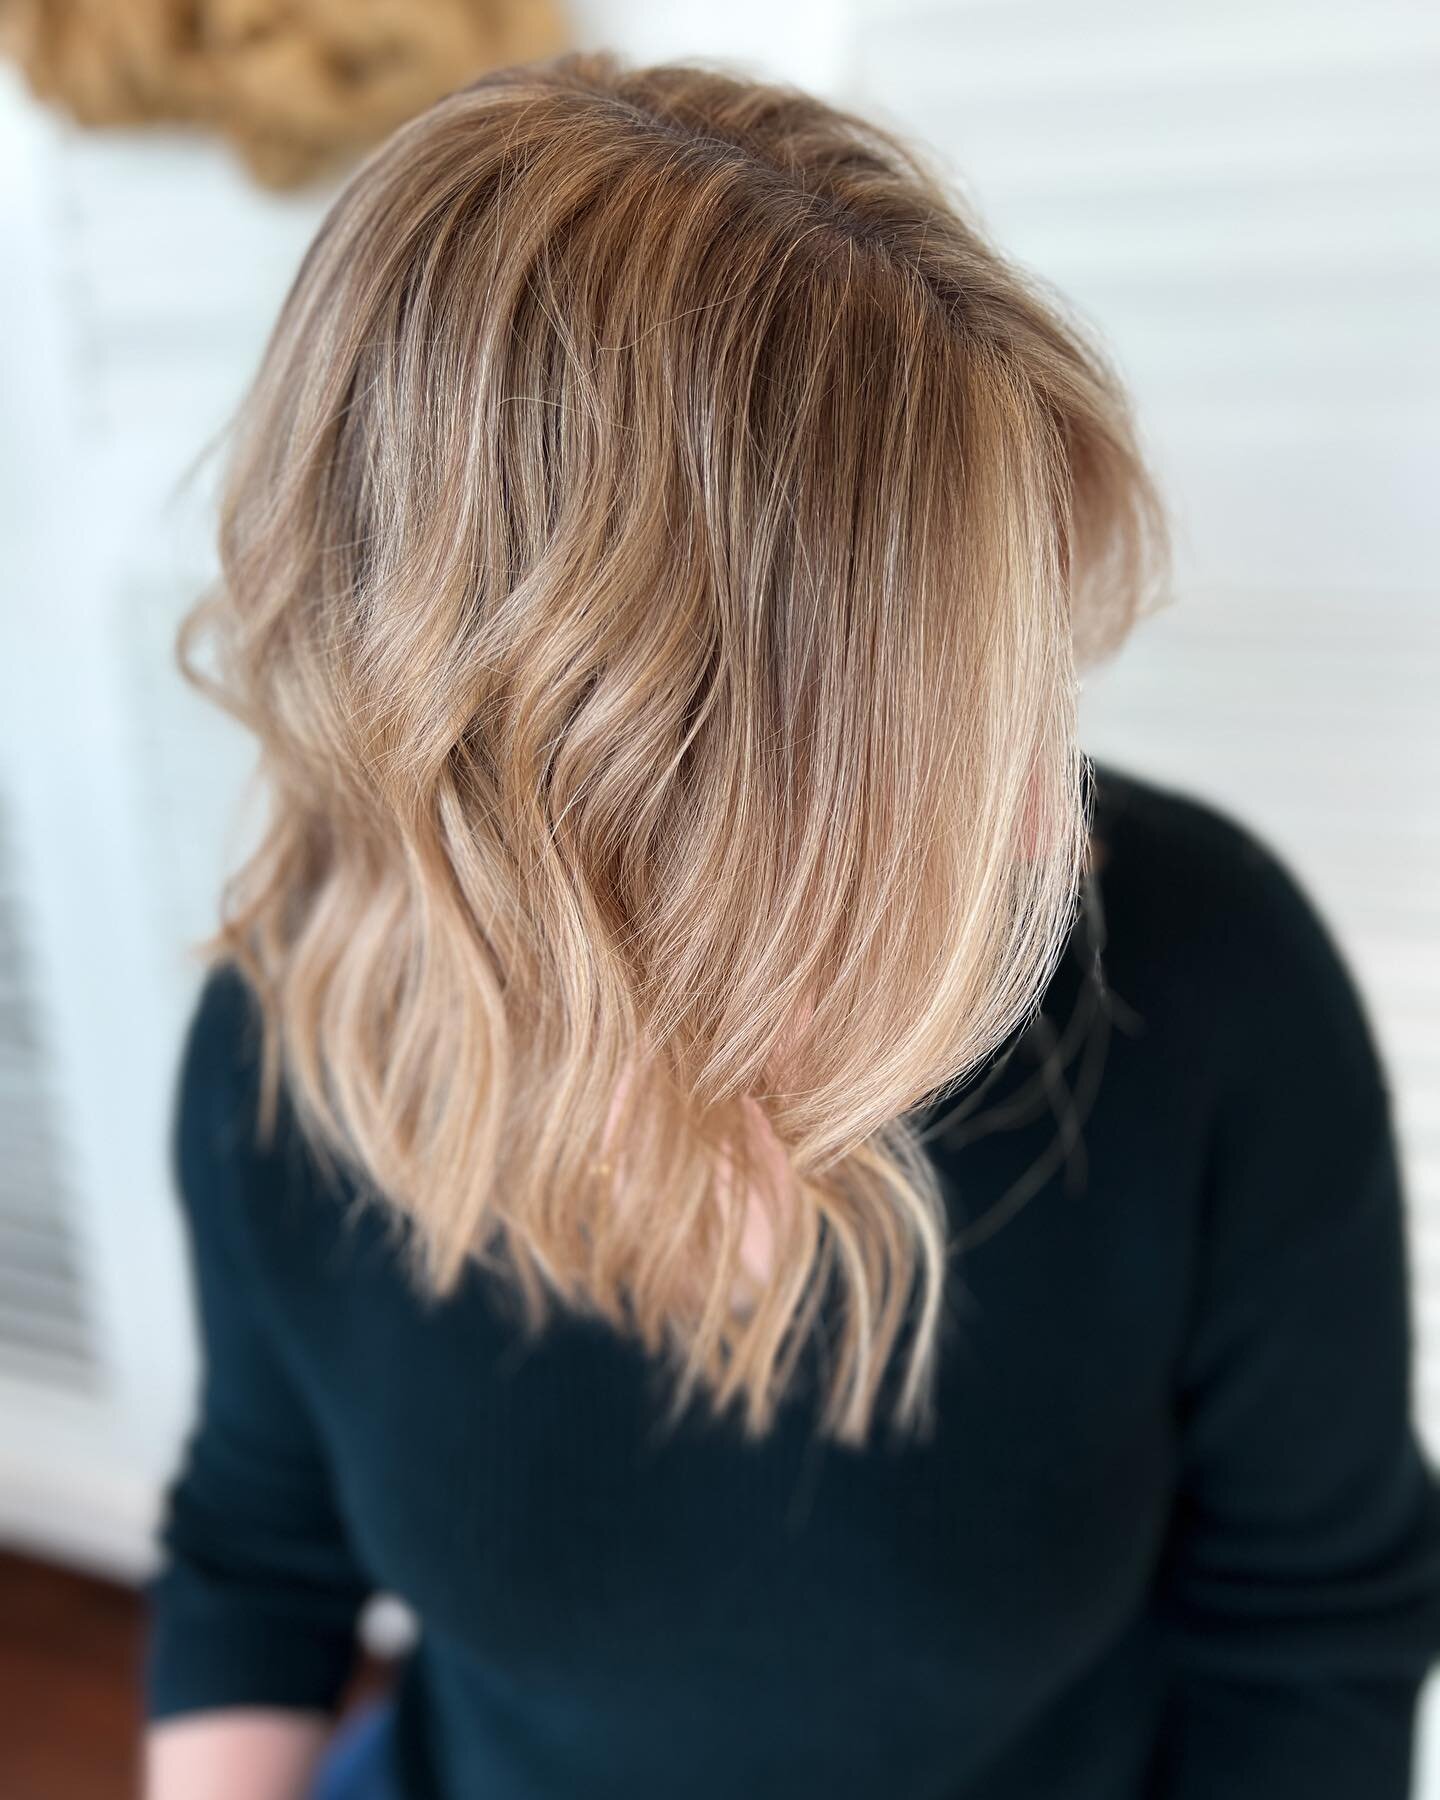 I&rsquo;ve been busy keep my skills fresh. Check out this gorgeous blonde. I love how it turned out. 

Hair by @crystalcherisheshair swing over to my page and check out my story, give me a follow;) 

#yeghairstylist #yegsalon #yegstylist #yeghair #ye